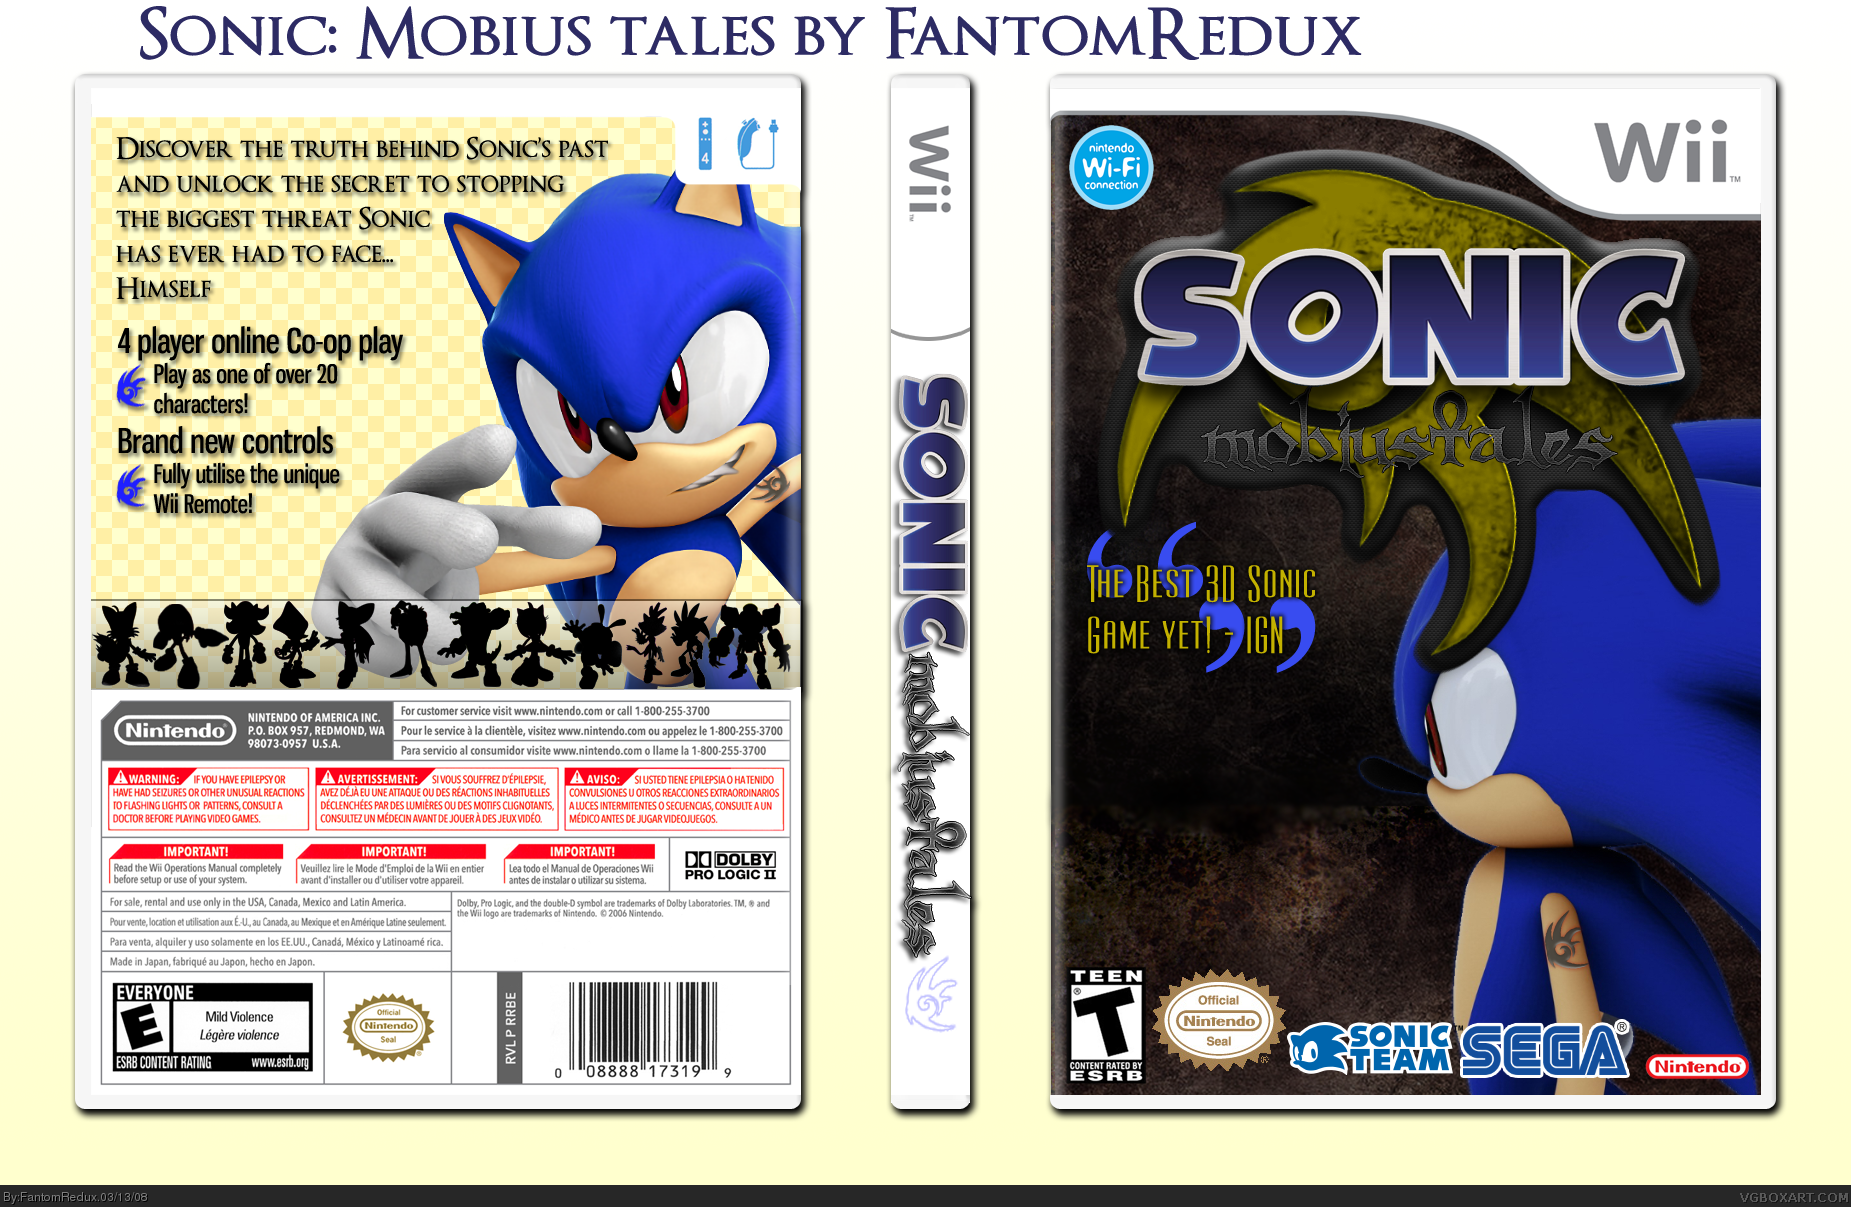 Sonic: Mobius Tales box cover